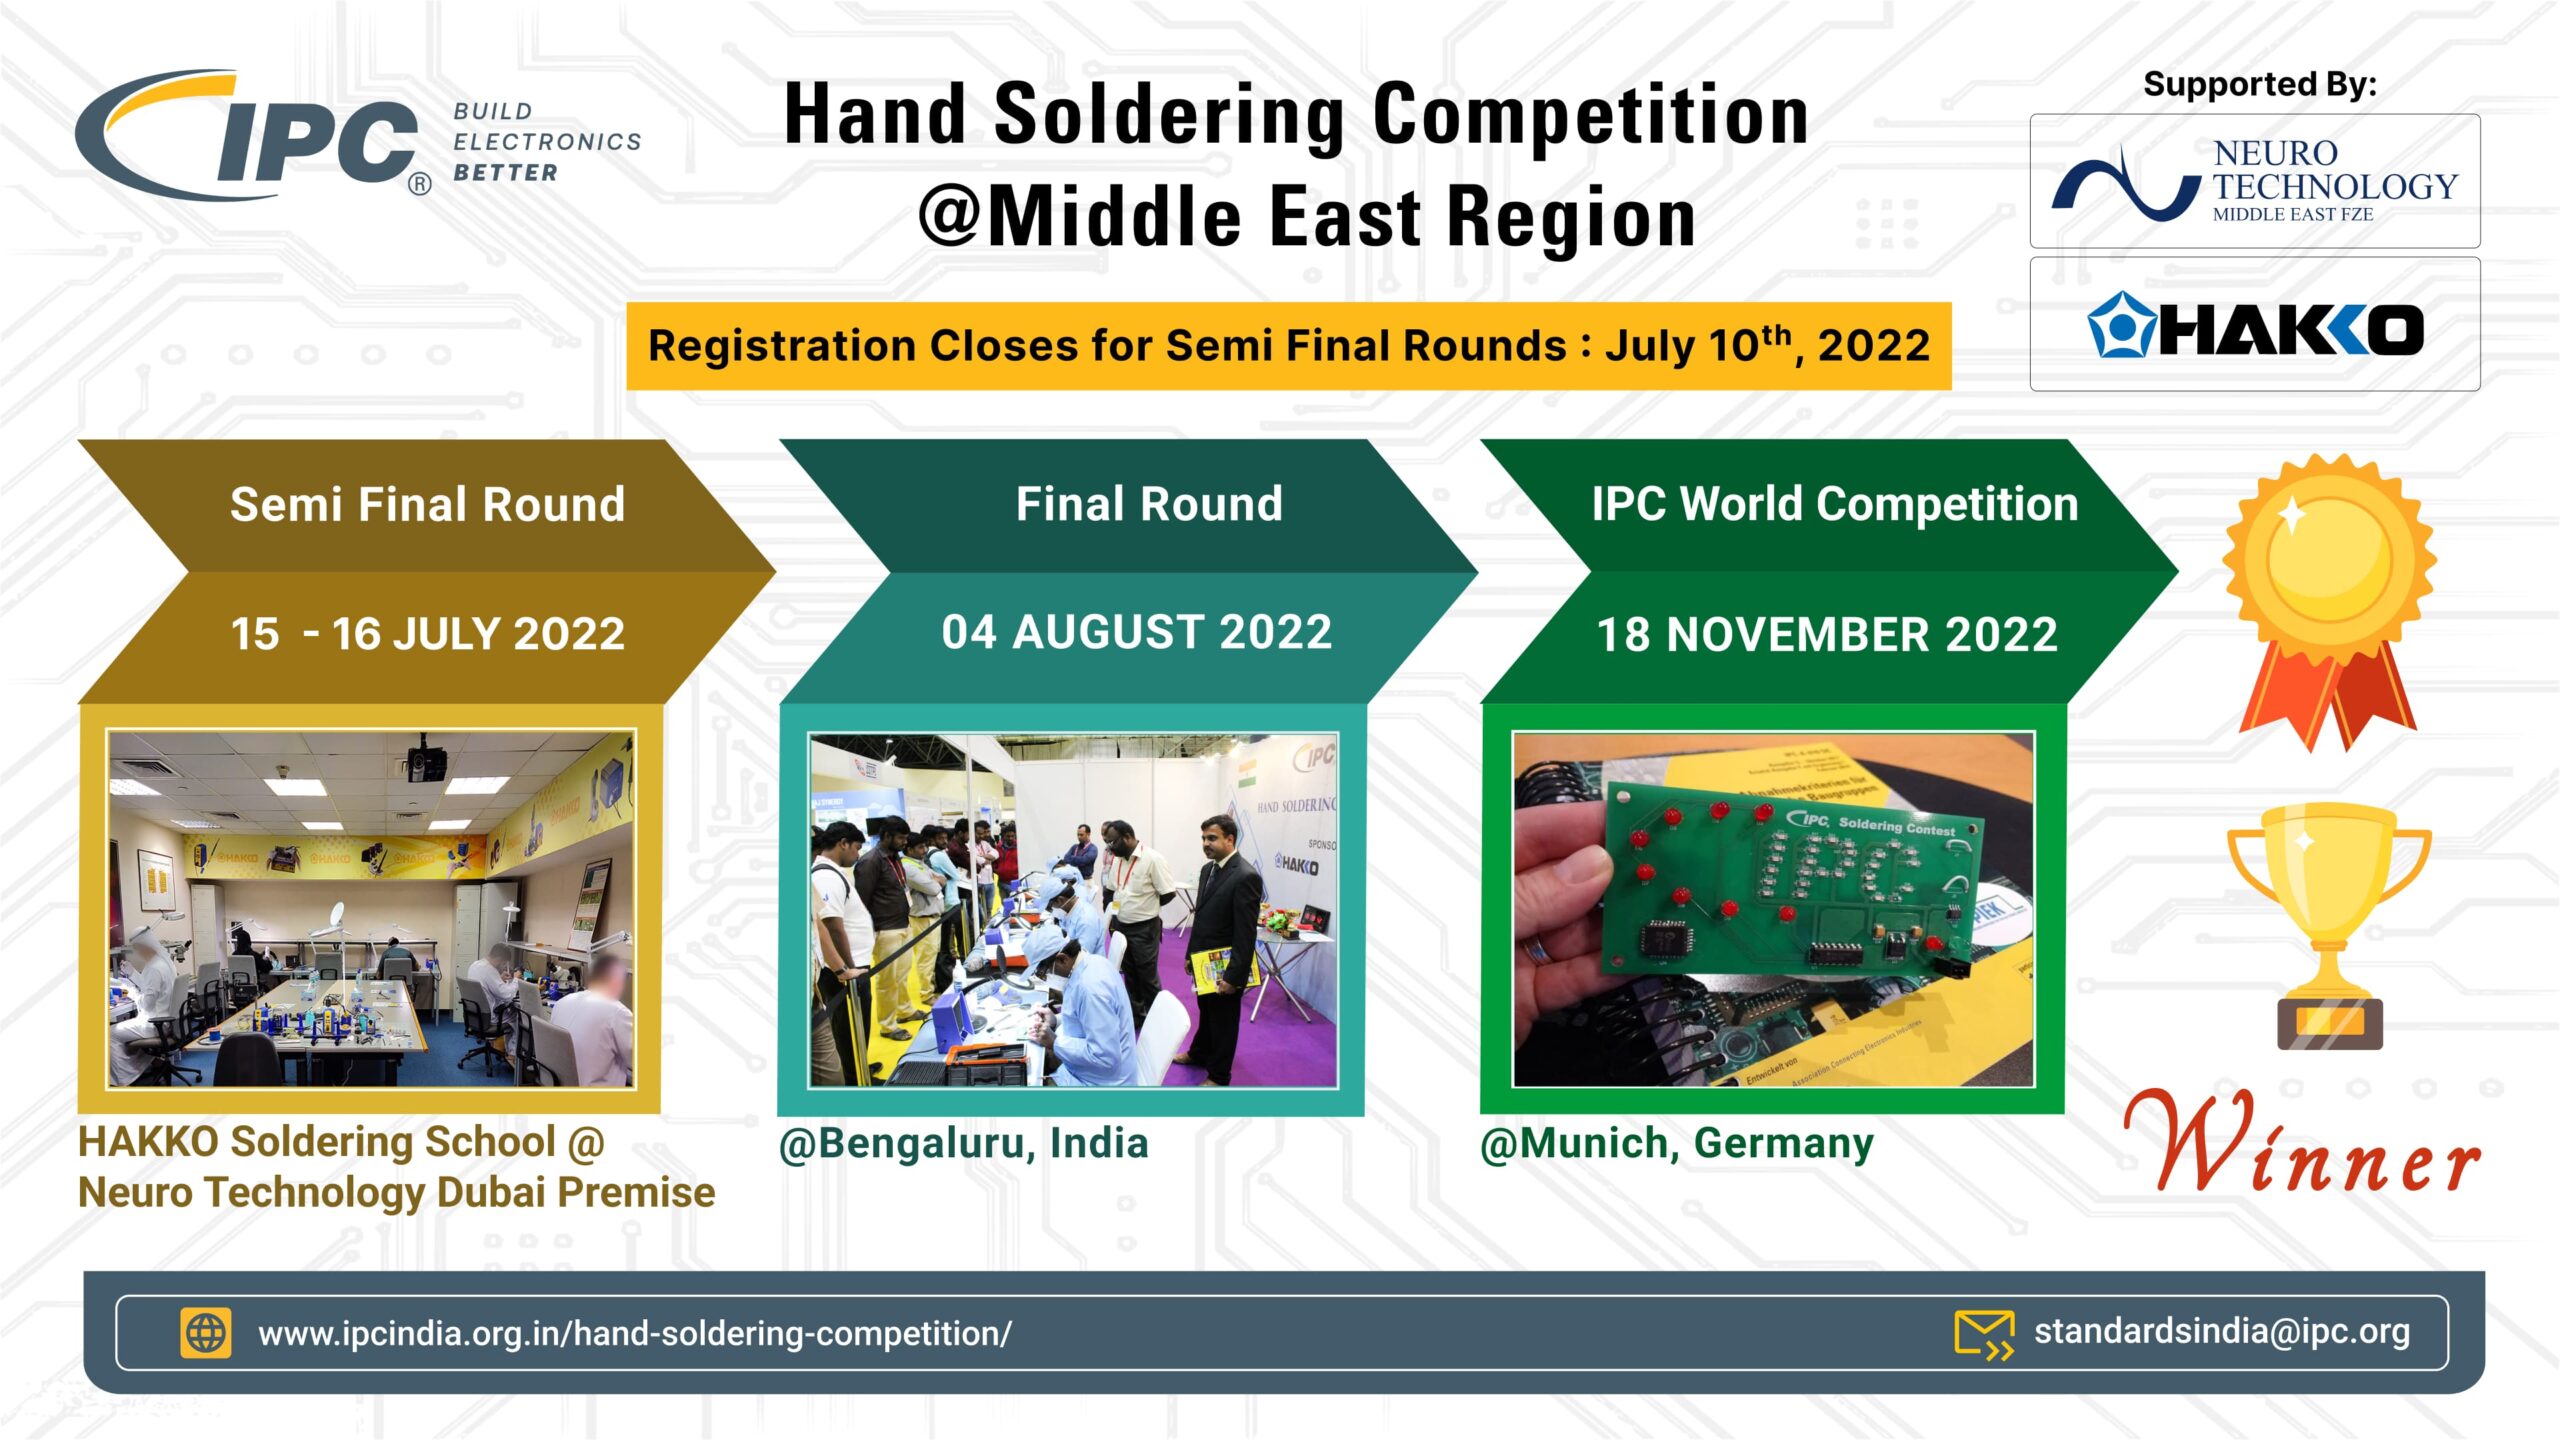 IPC Hand Soldering Competition 2022 Middle East Region